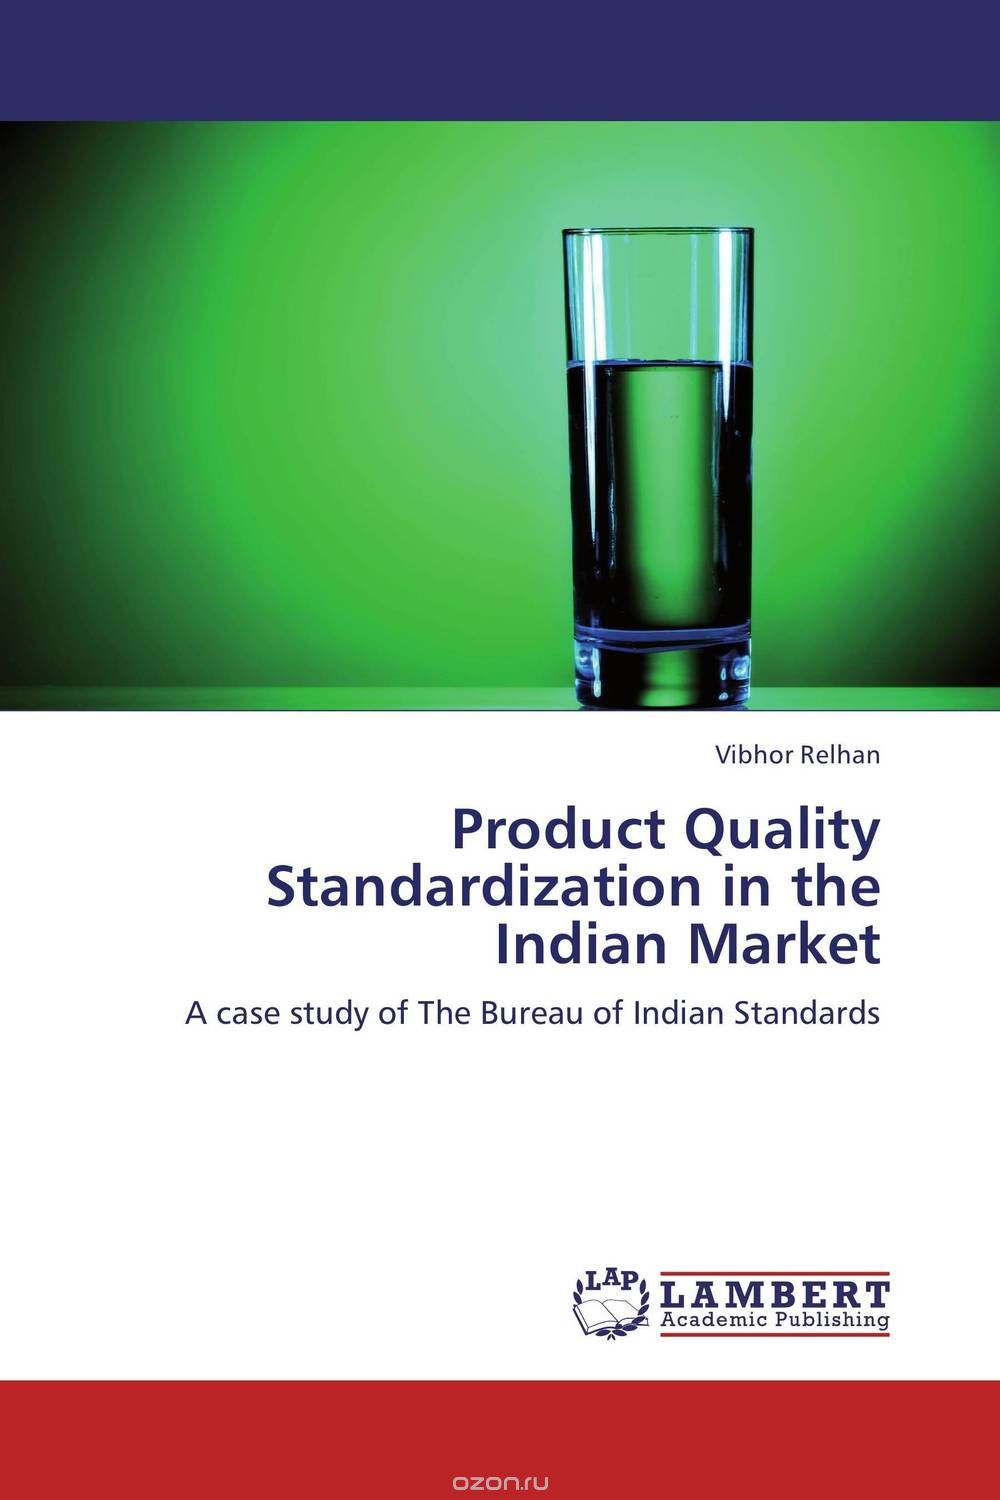 Product Quality Standardization in the Indian Market